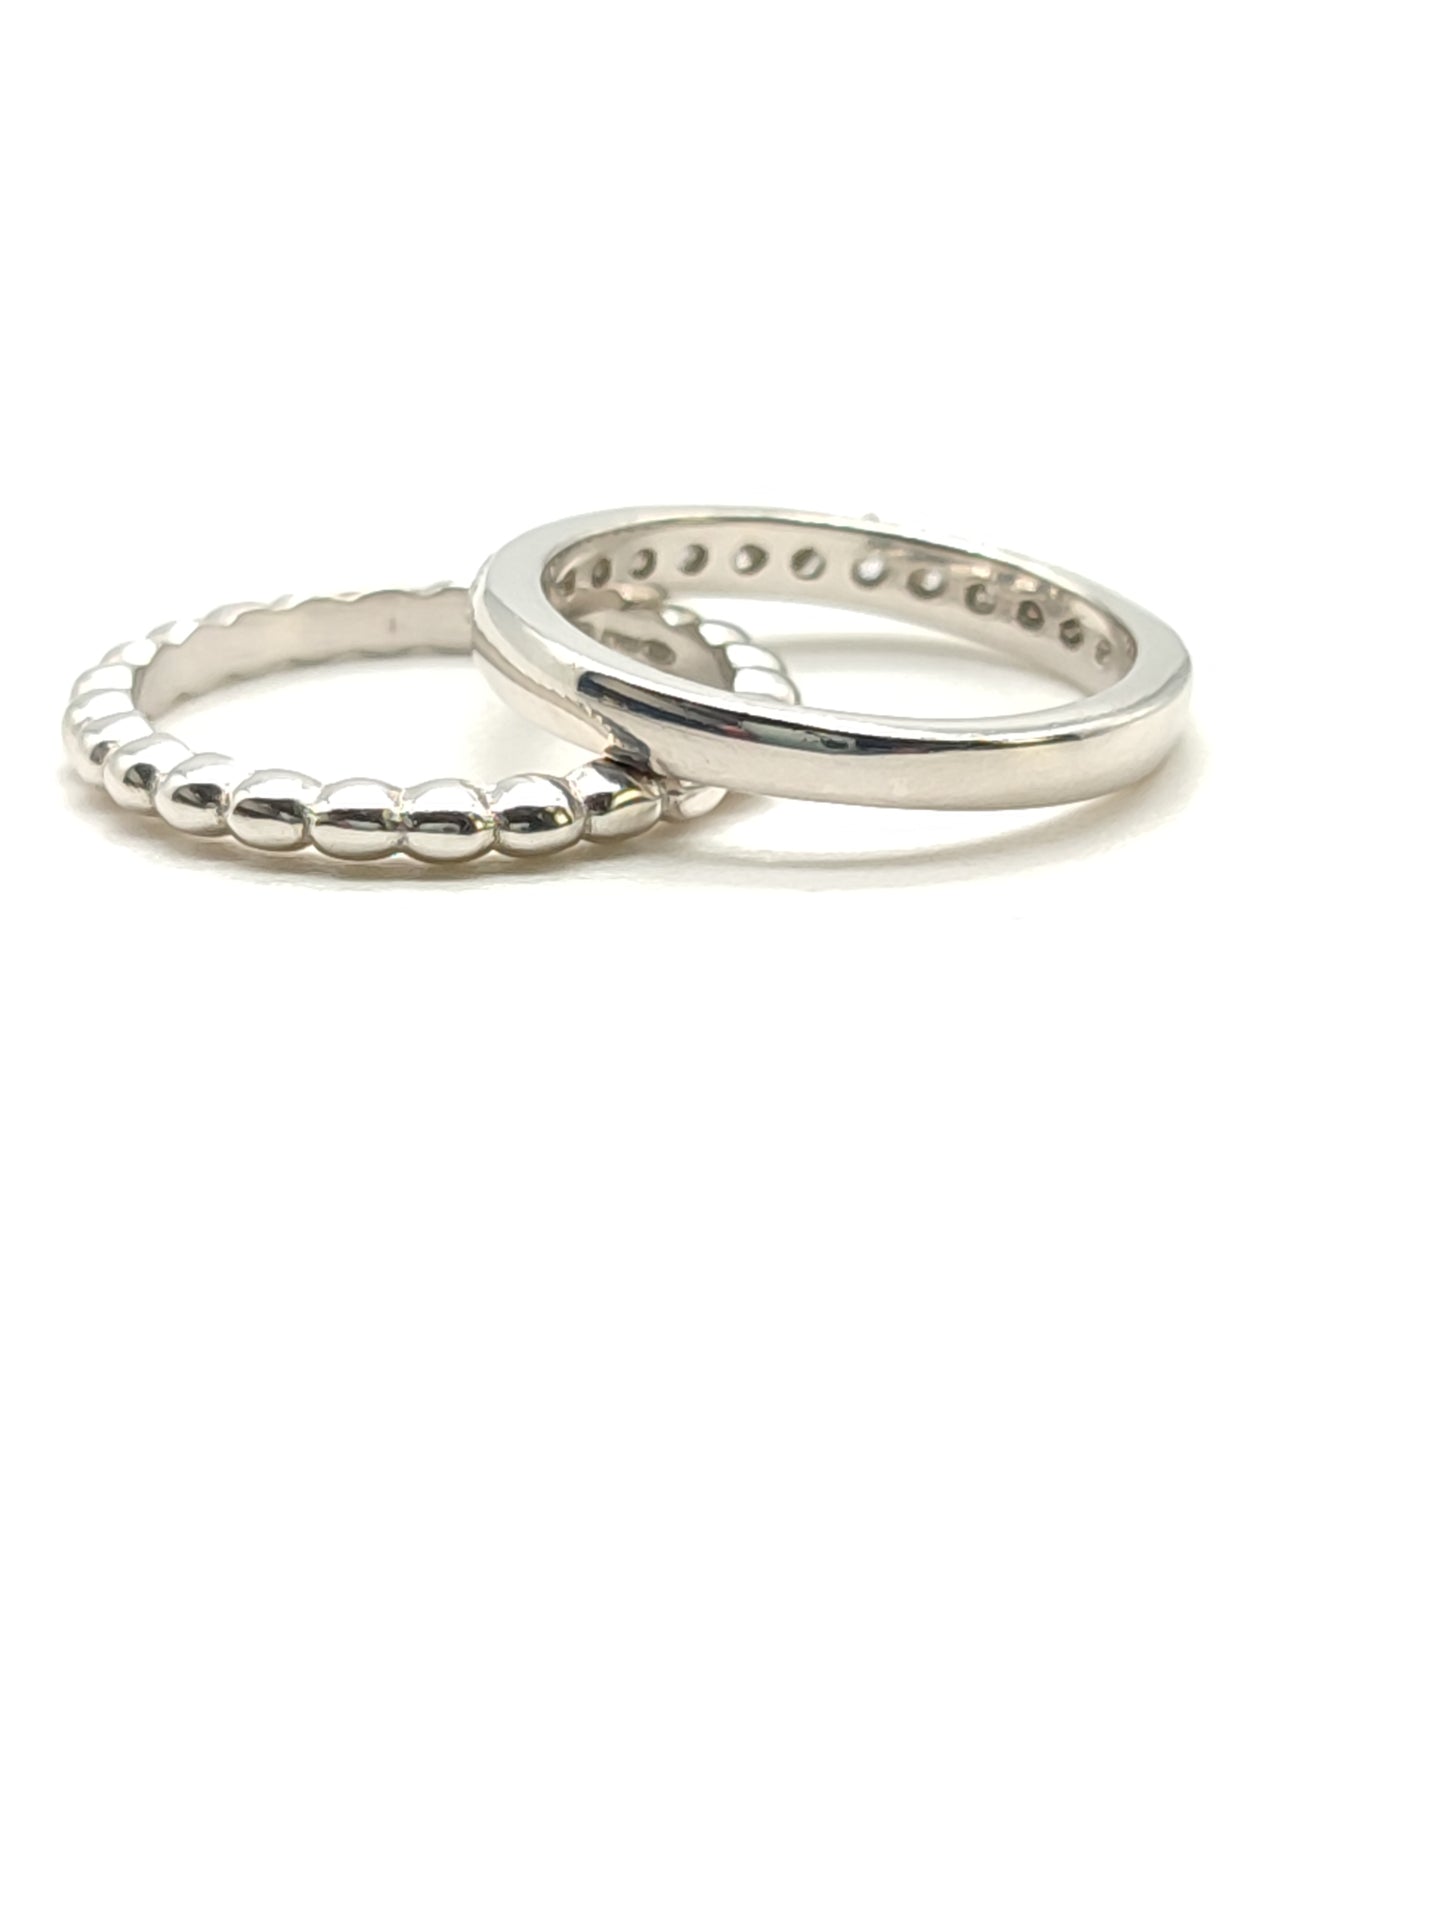 Silver ring with two bands